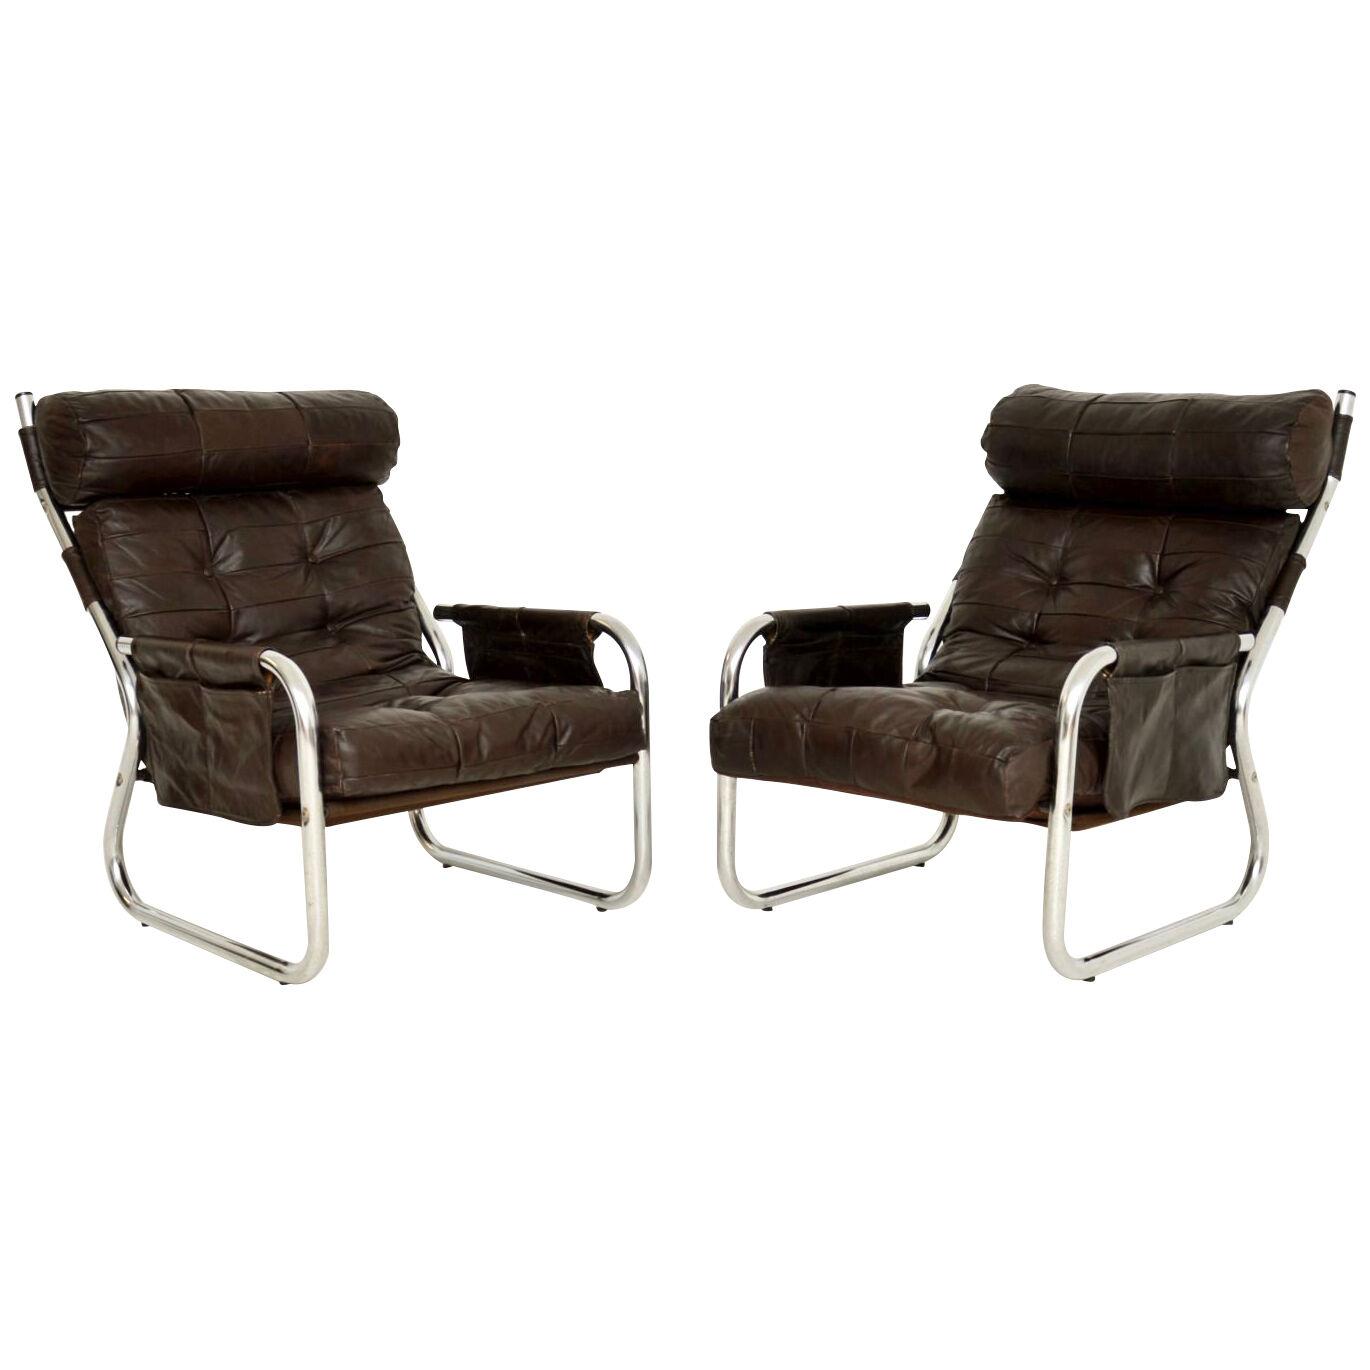 1960's Pair of Vintage Danish Leather & Chrome Armchairs